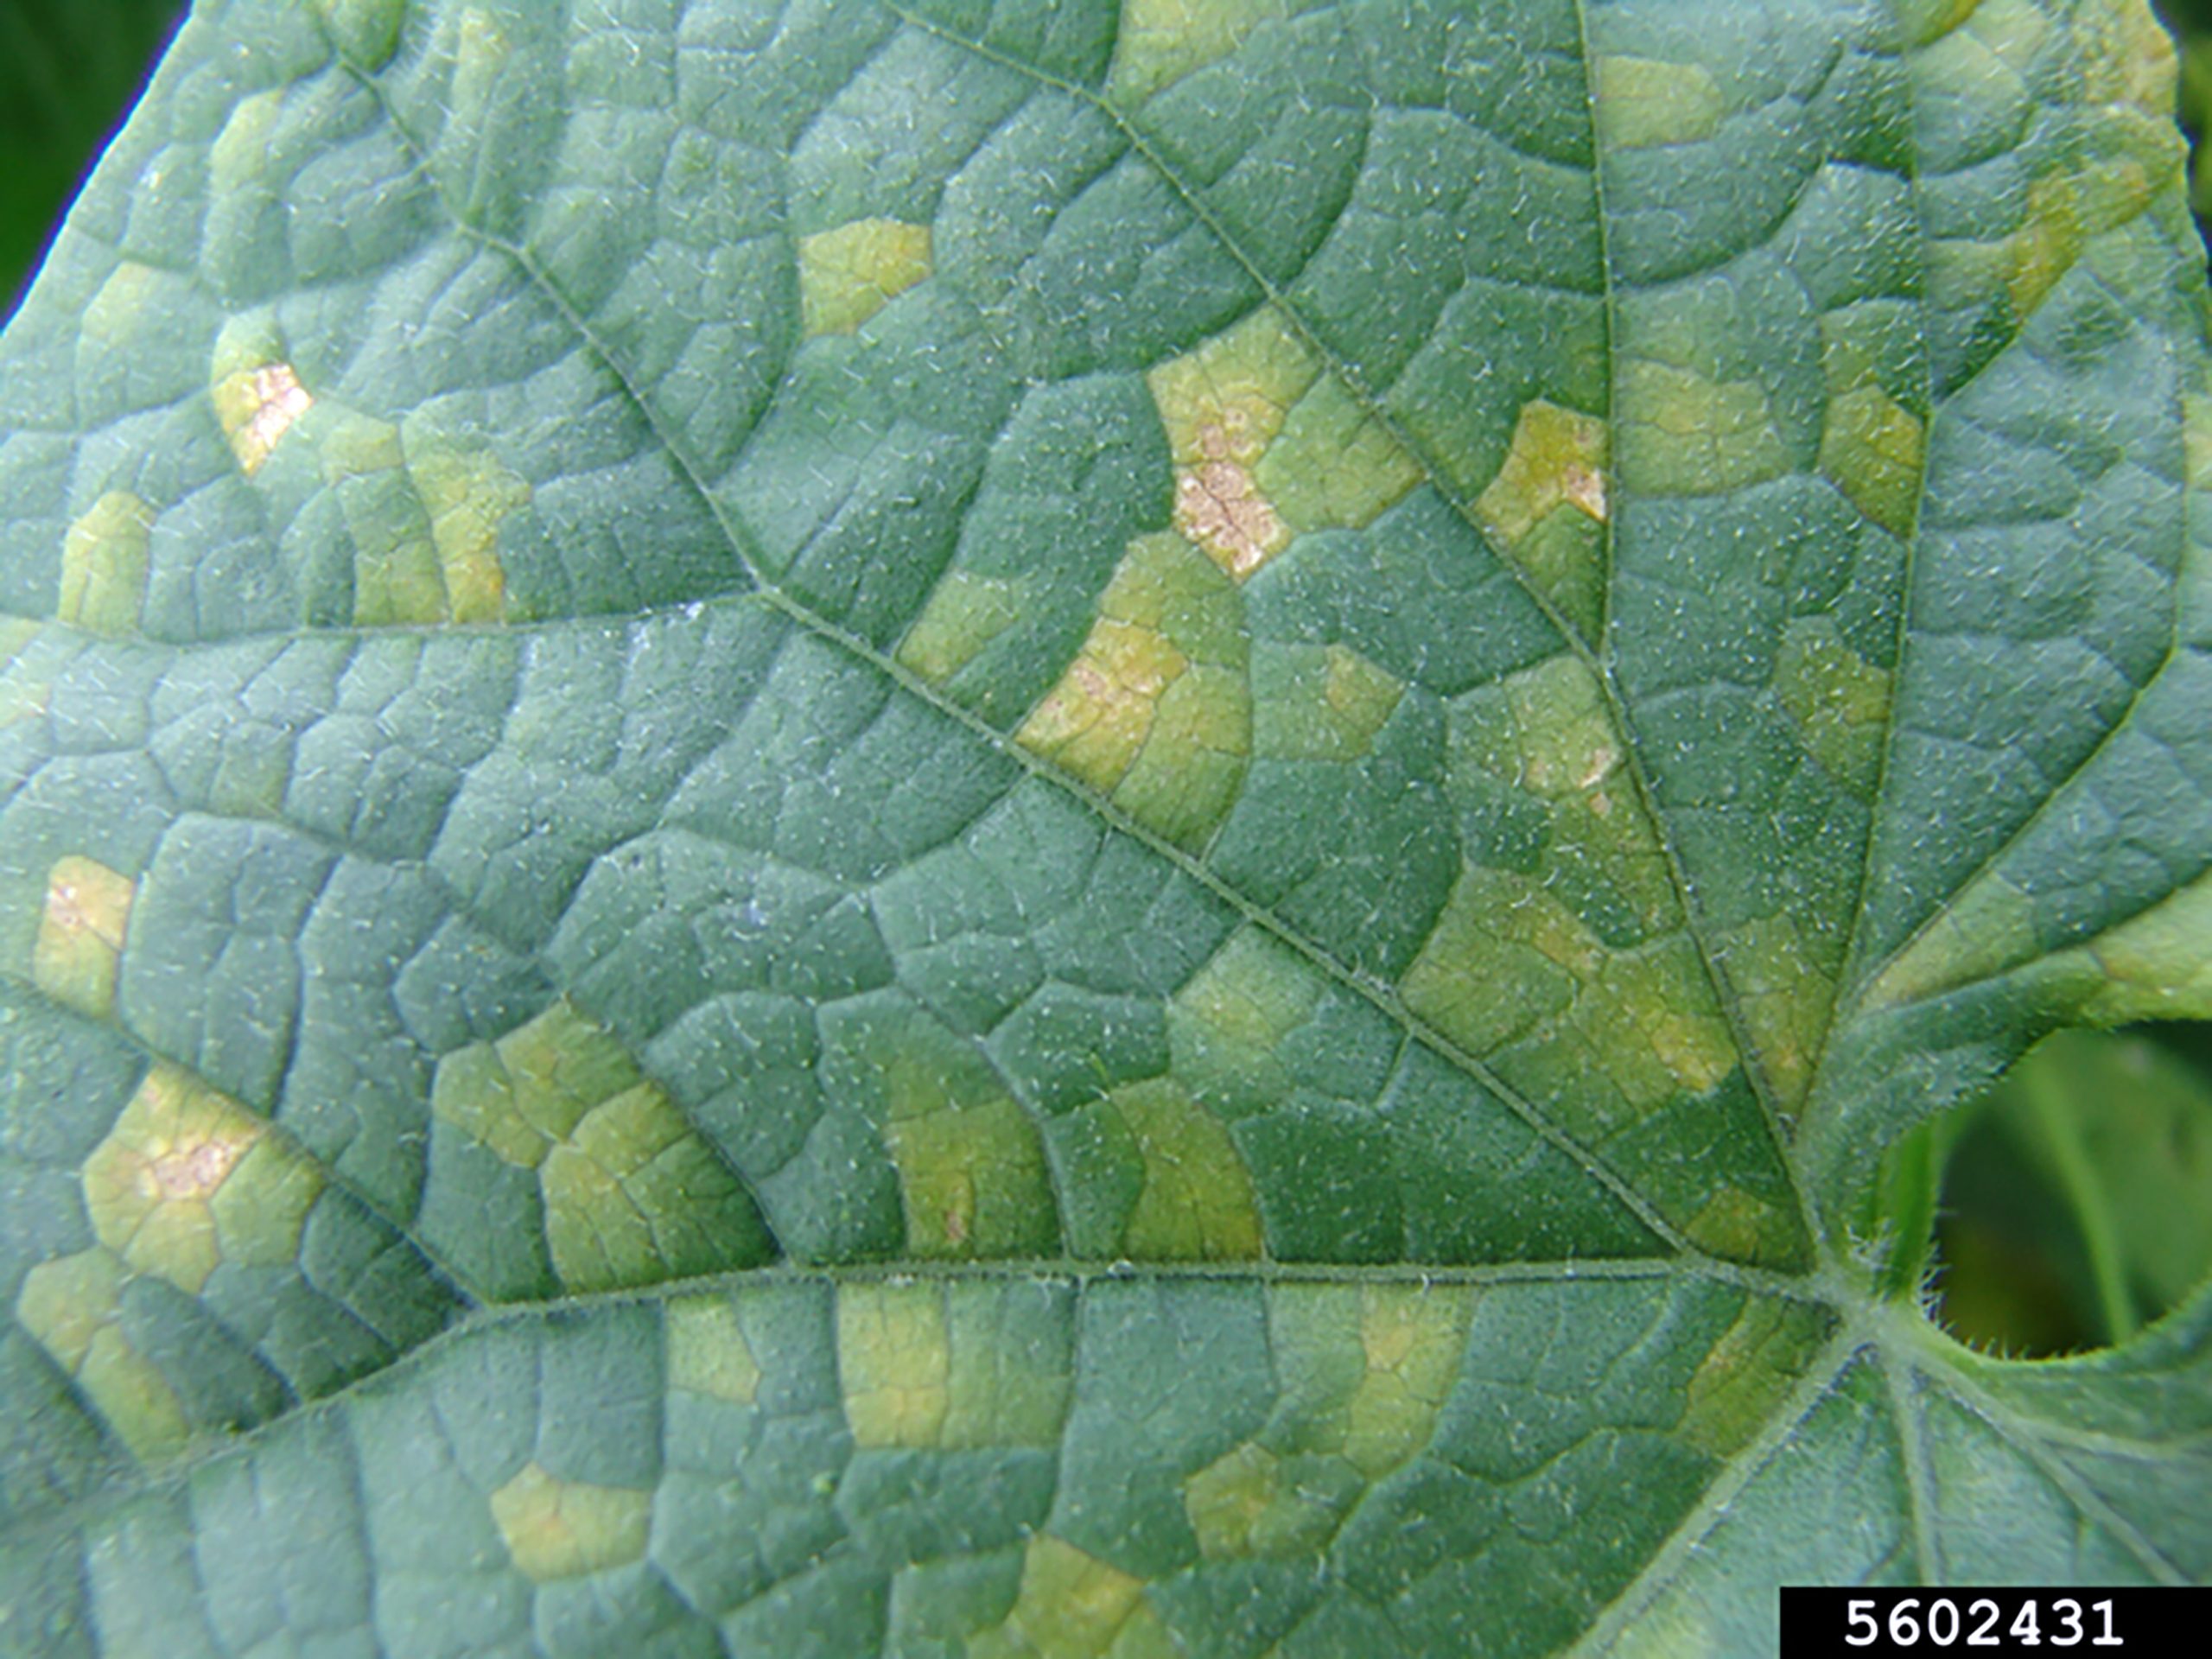 How to Prevent Powdery Mildew on Cucumbers